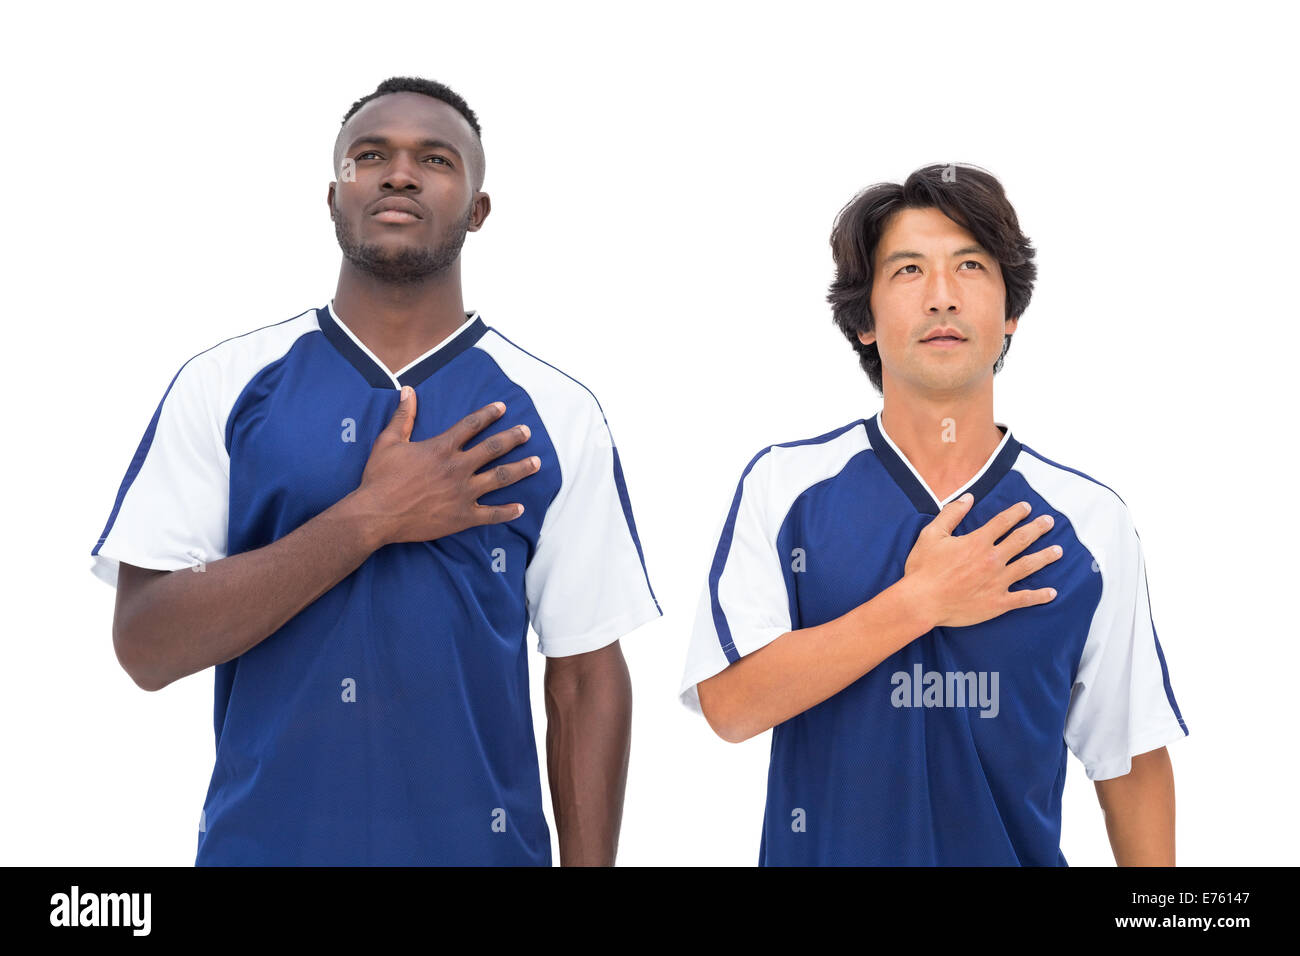 Football players in blue listening to anthem Stock Photo